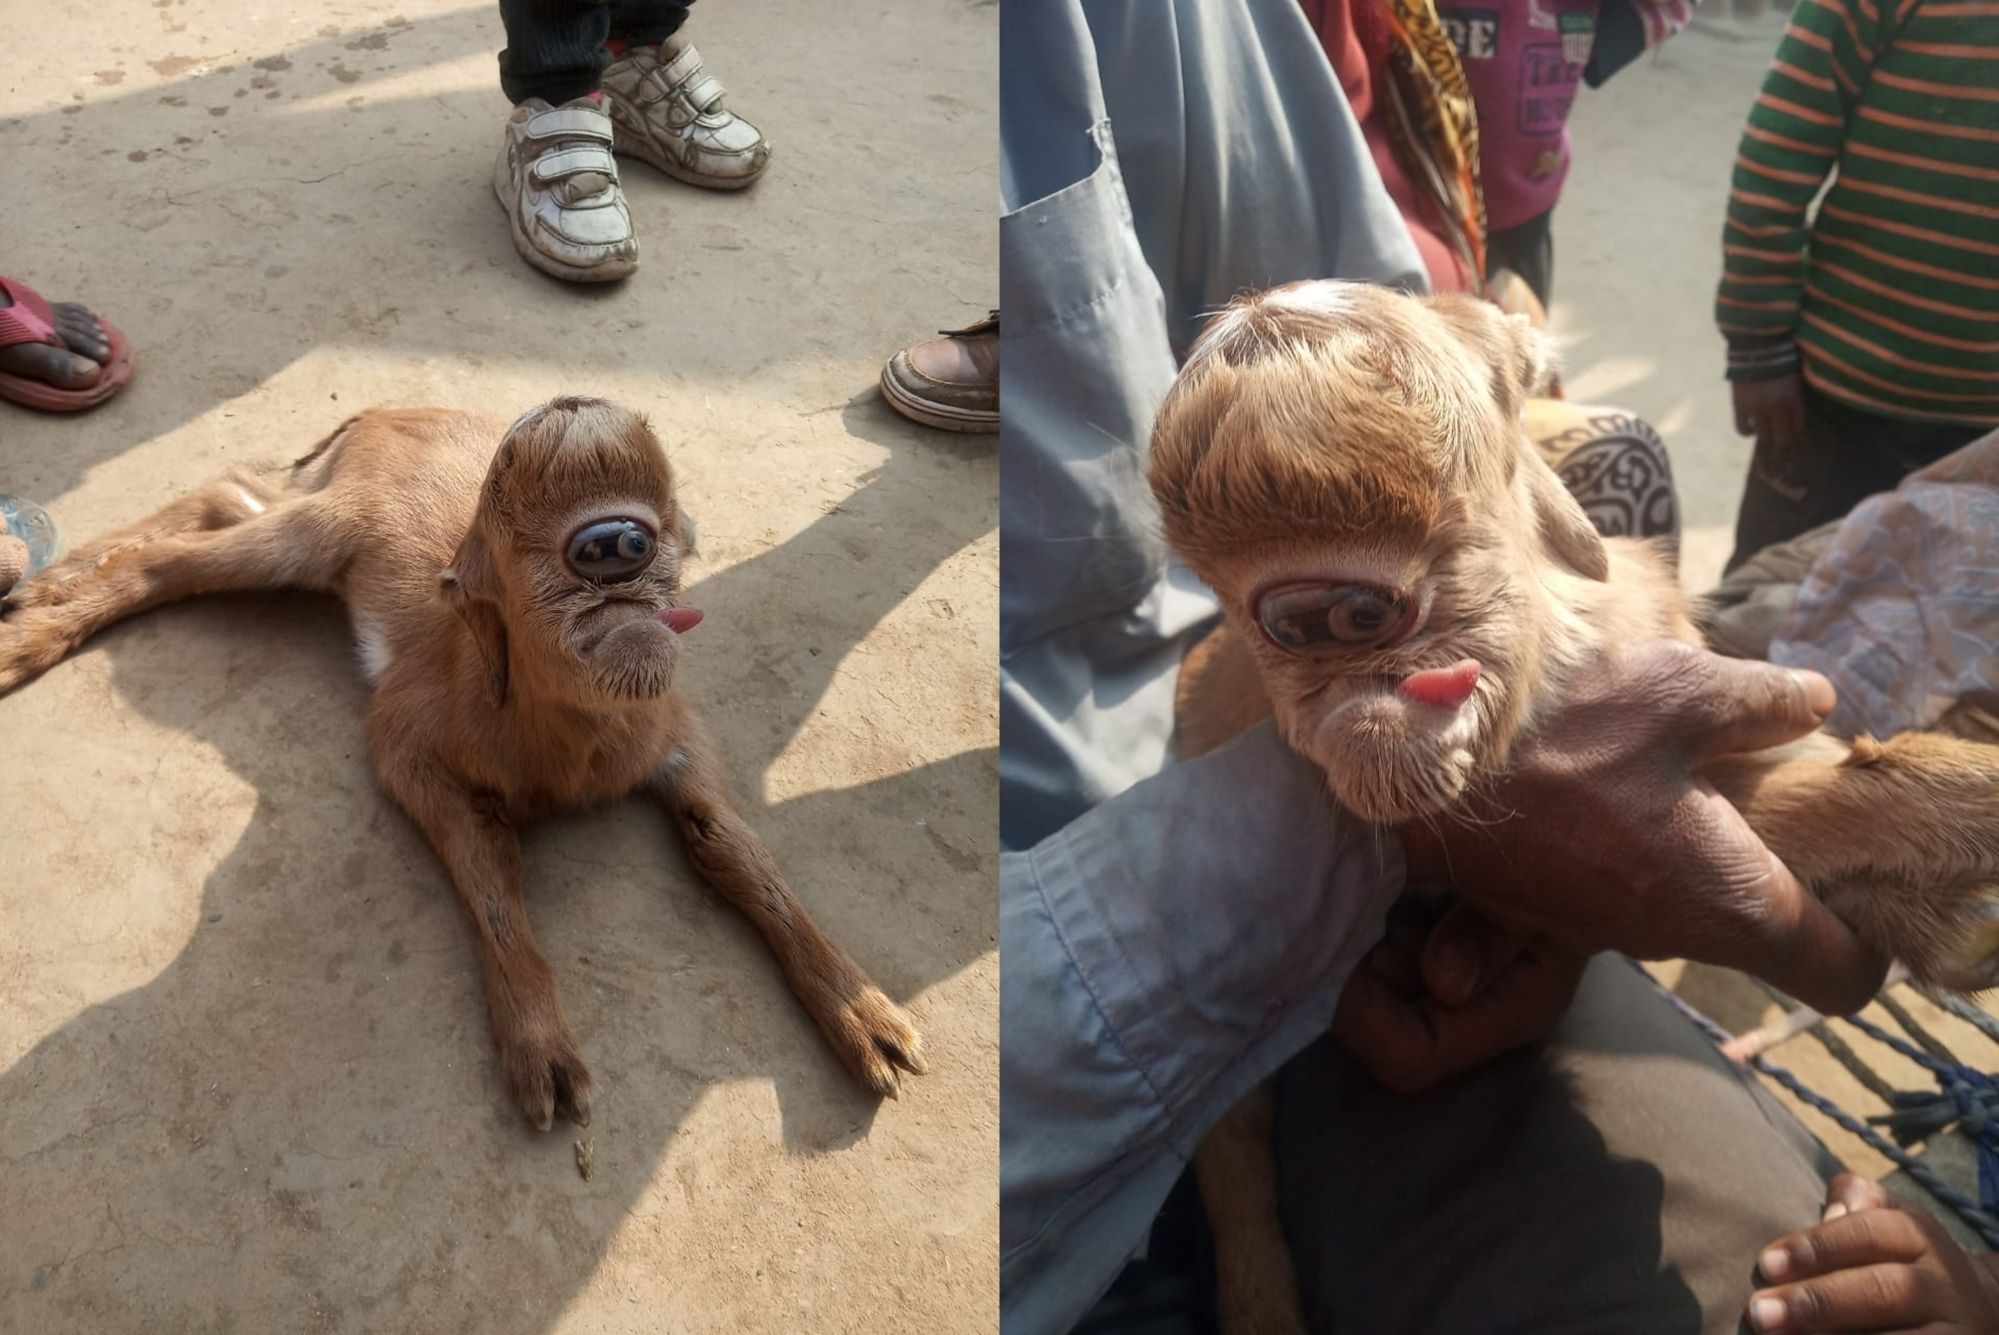 Abnormal Goat Kid Born With Large Eye Socket on Its Forehead, People Flock to UP Village to See It